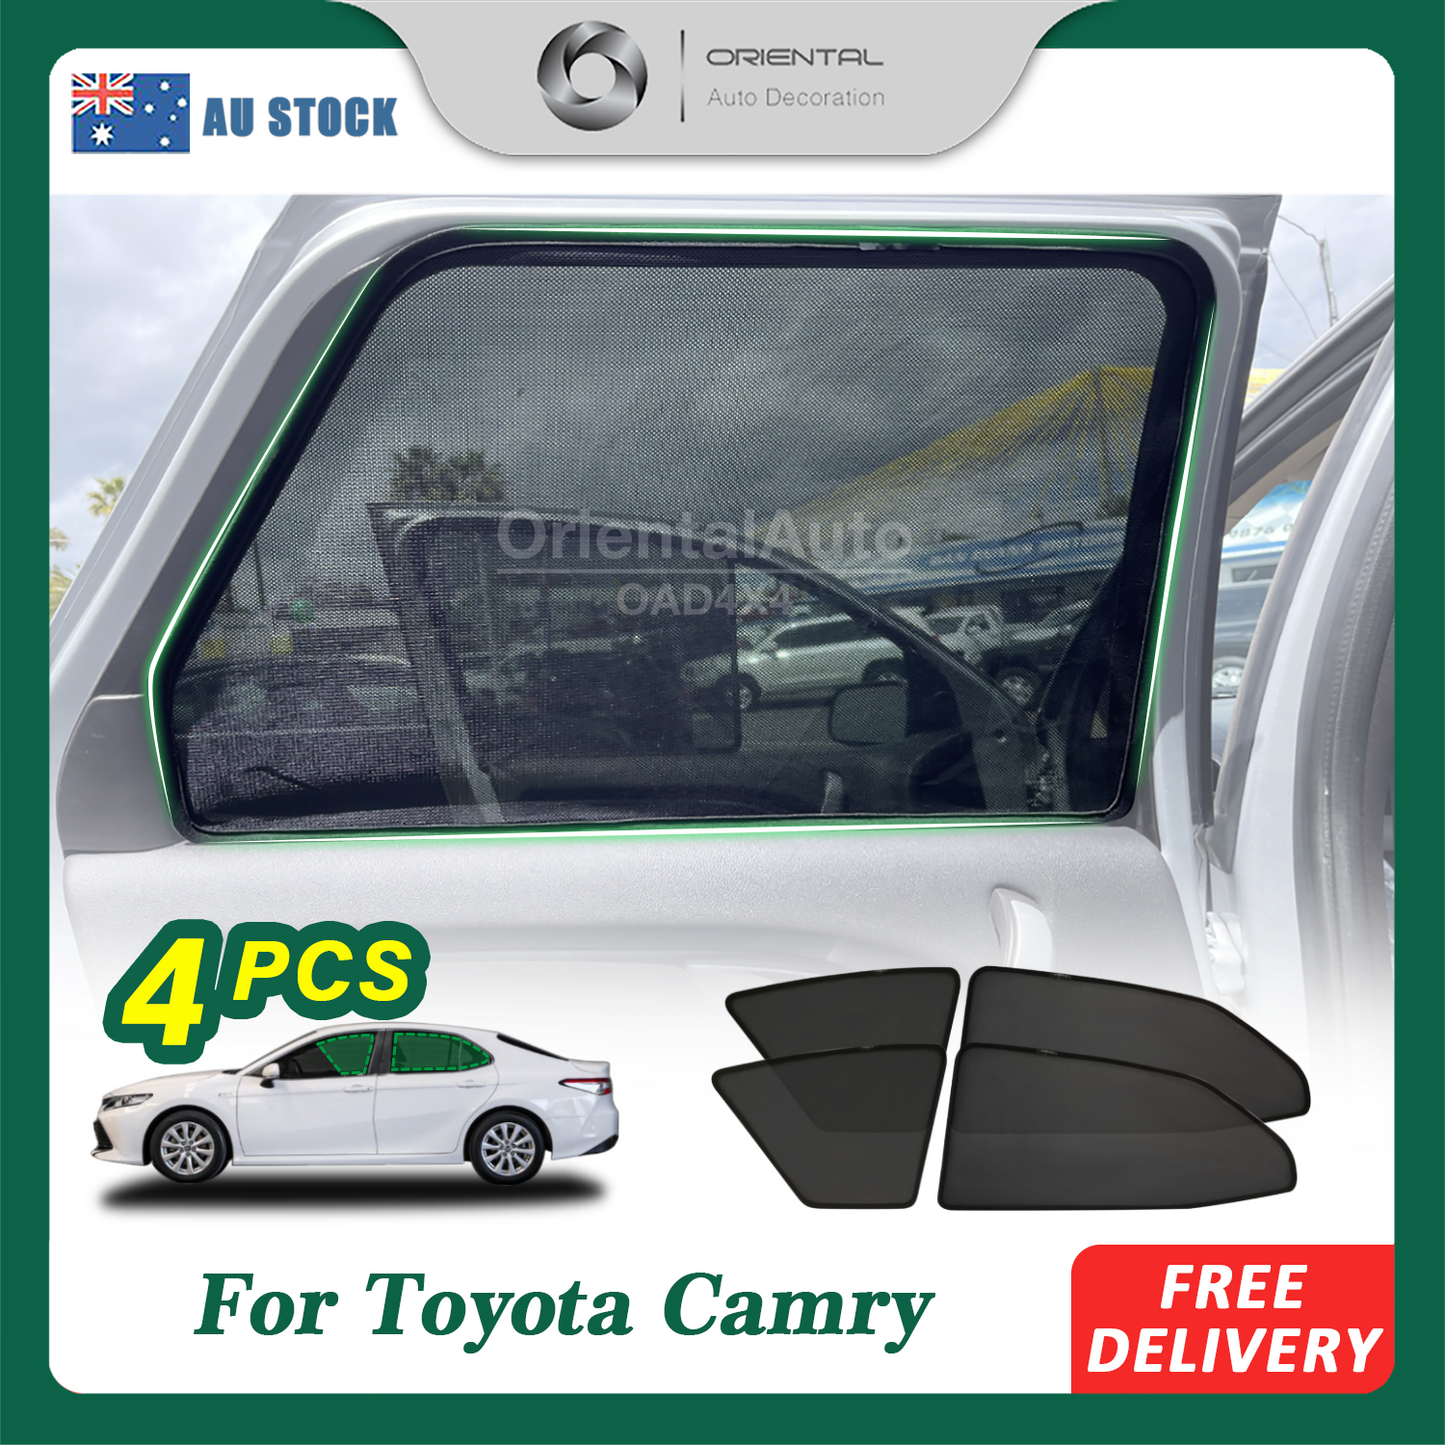 4PCS Magnetic Sun Shade for Toyota Camry 2017+ Window Sun Shades UV Protection Mesh Cover